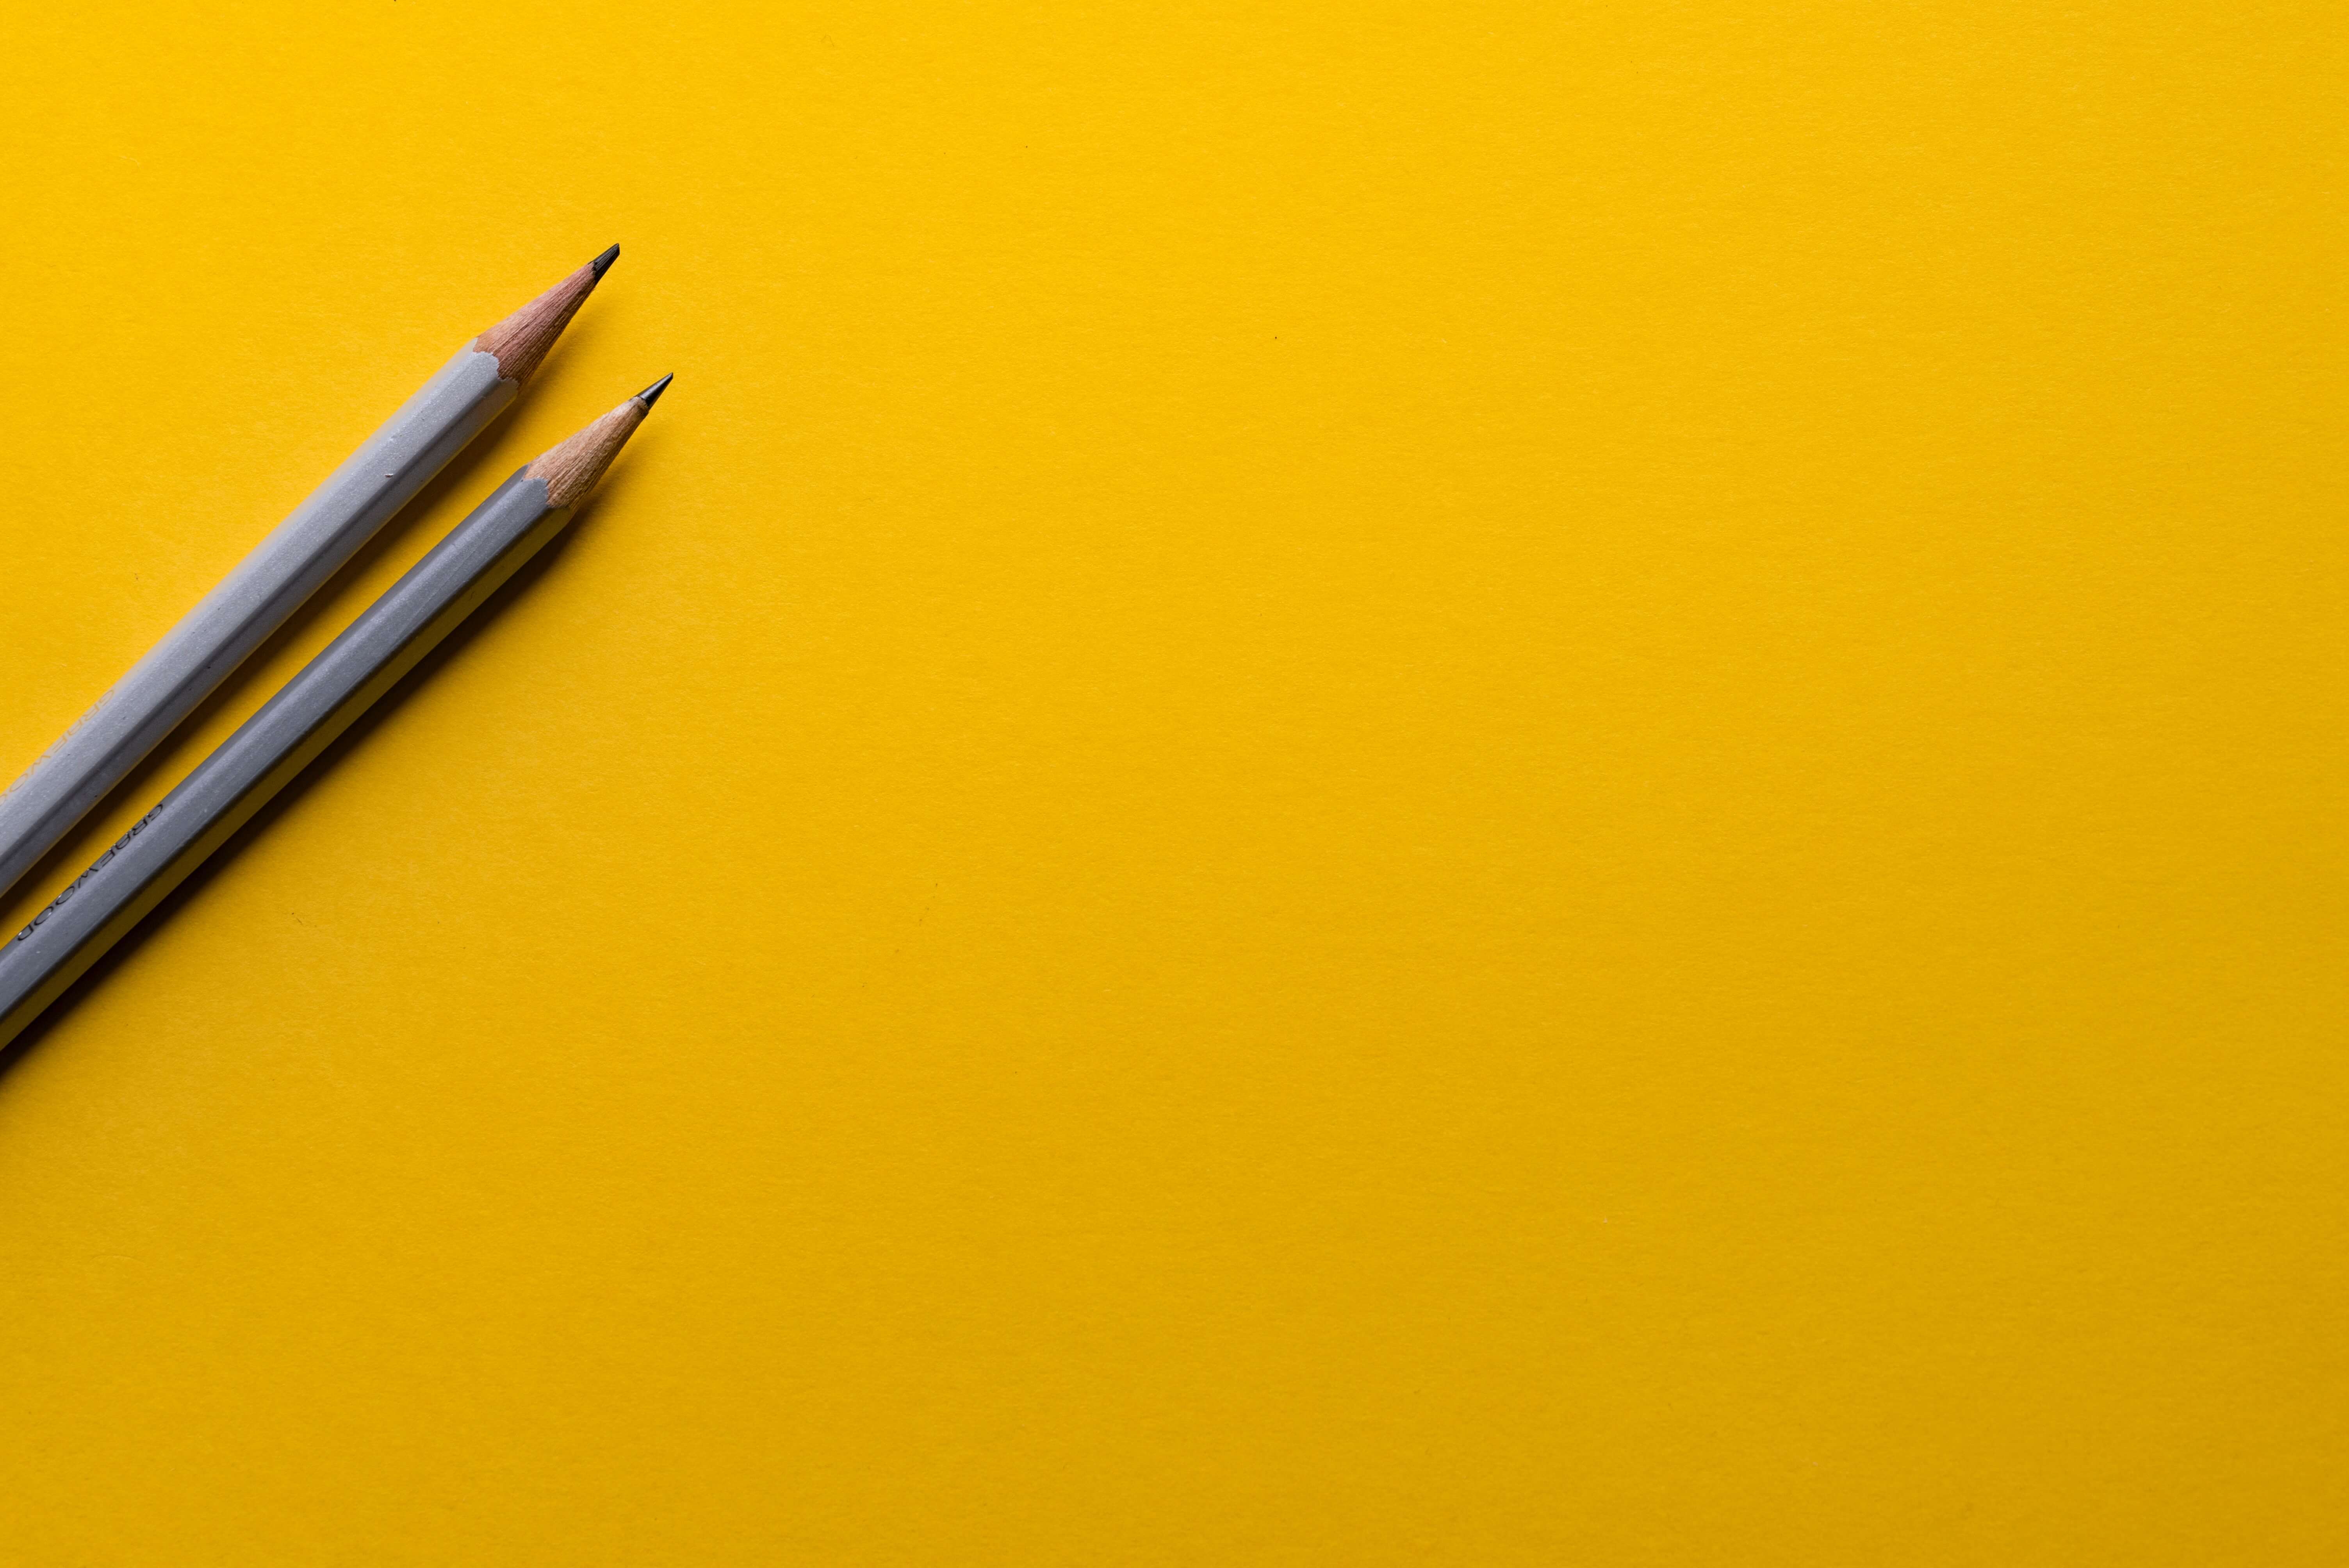 Two pencils placed over a yellowish surface to signify design briefs